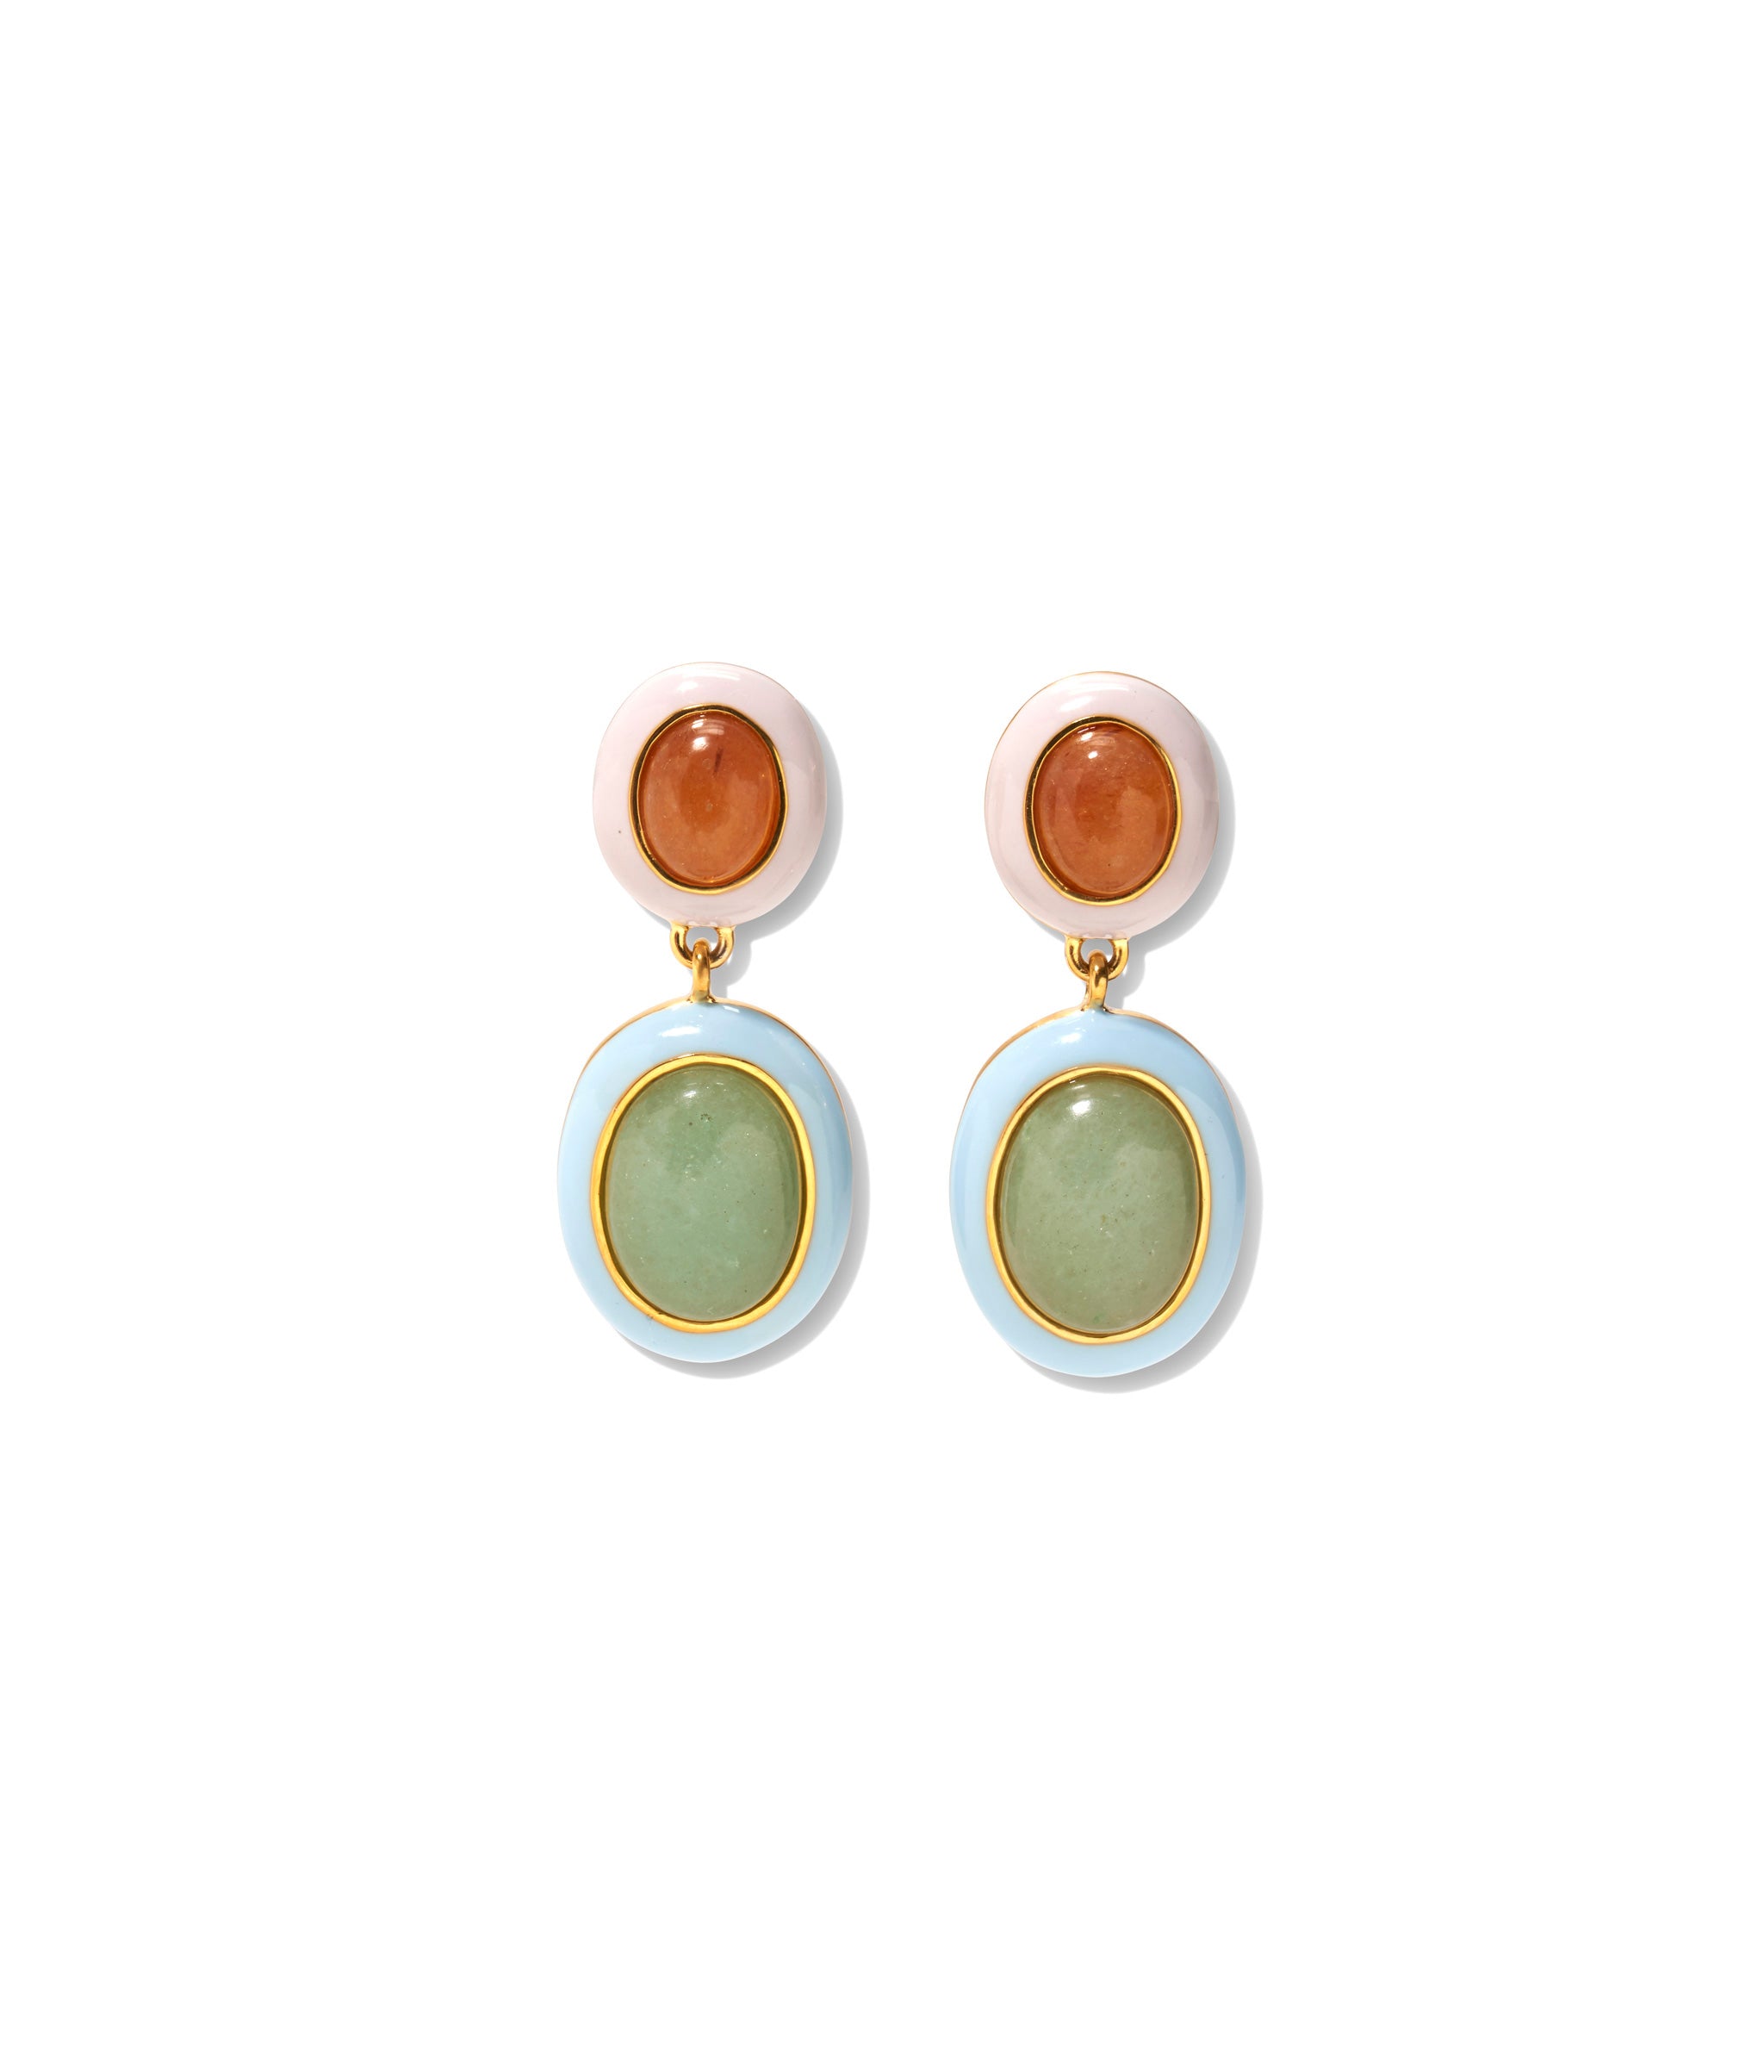 Papaya Earrings. Gold-plated brass and enamel linked ovals, with peach and green aventurine stone inlay.